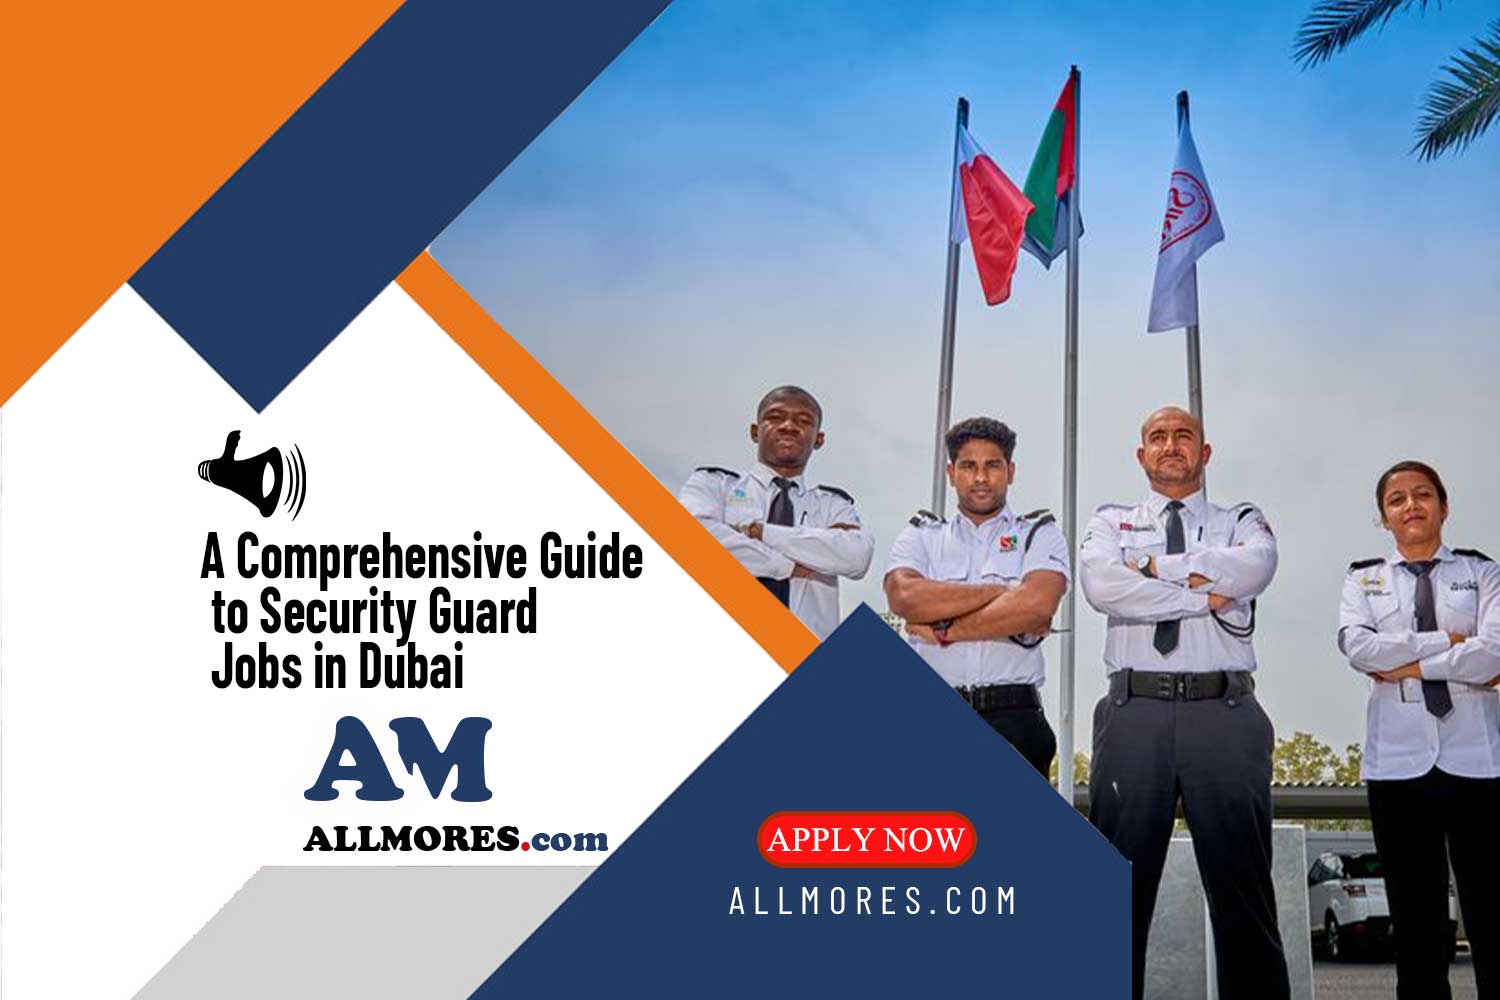 A Comprehensive Guide to Security Guard Jobs in Dubai